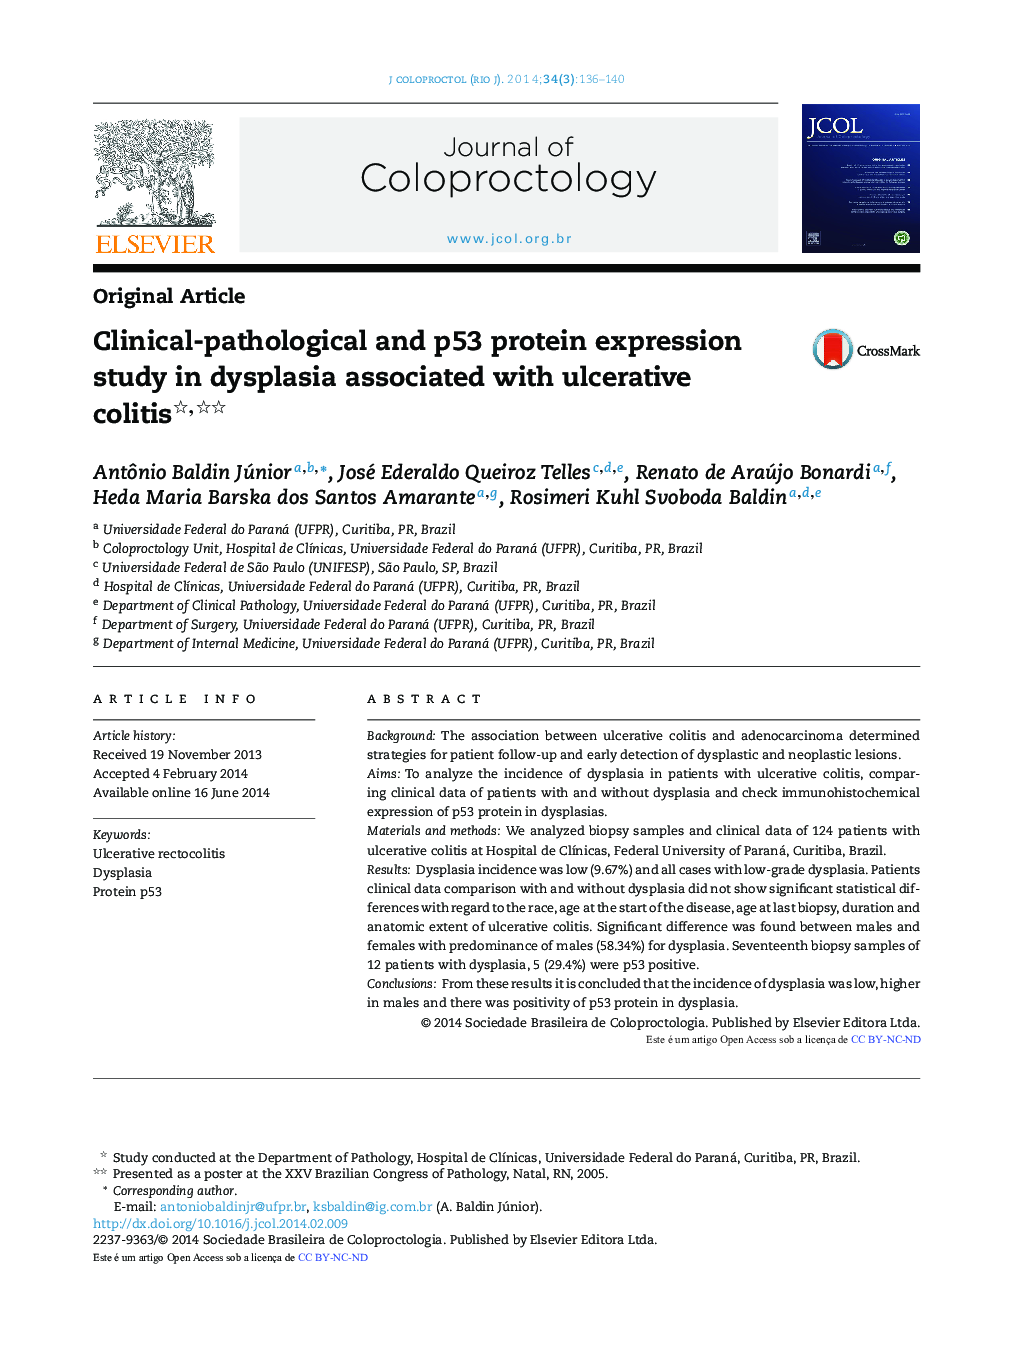 Clinical-pathological and p53 protein expression study in dysplasia associated with ulcerative colitis 